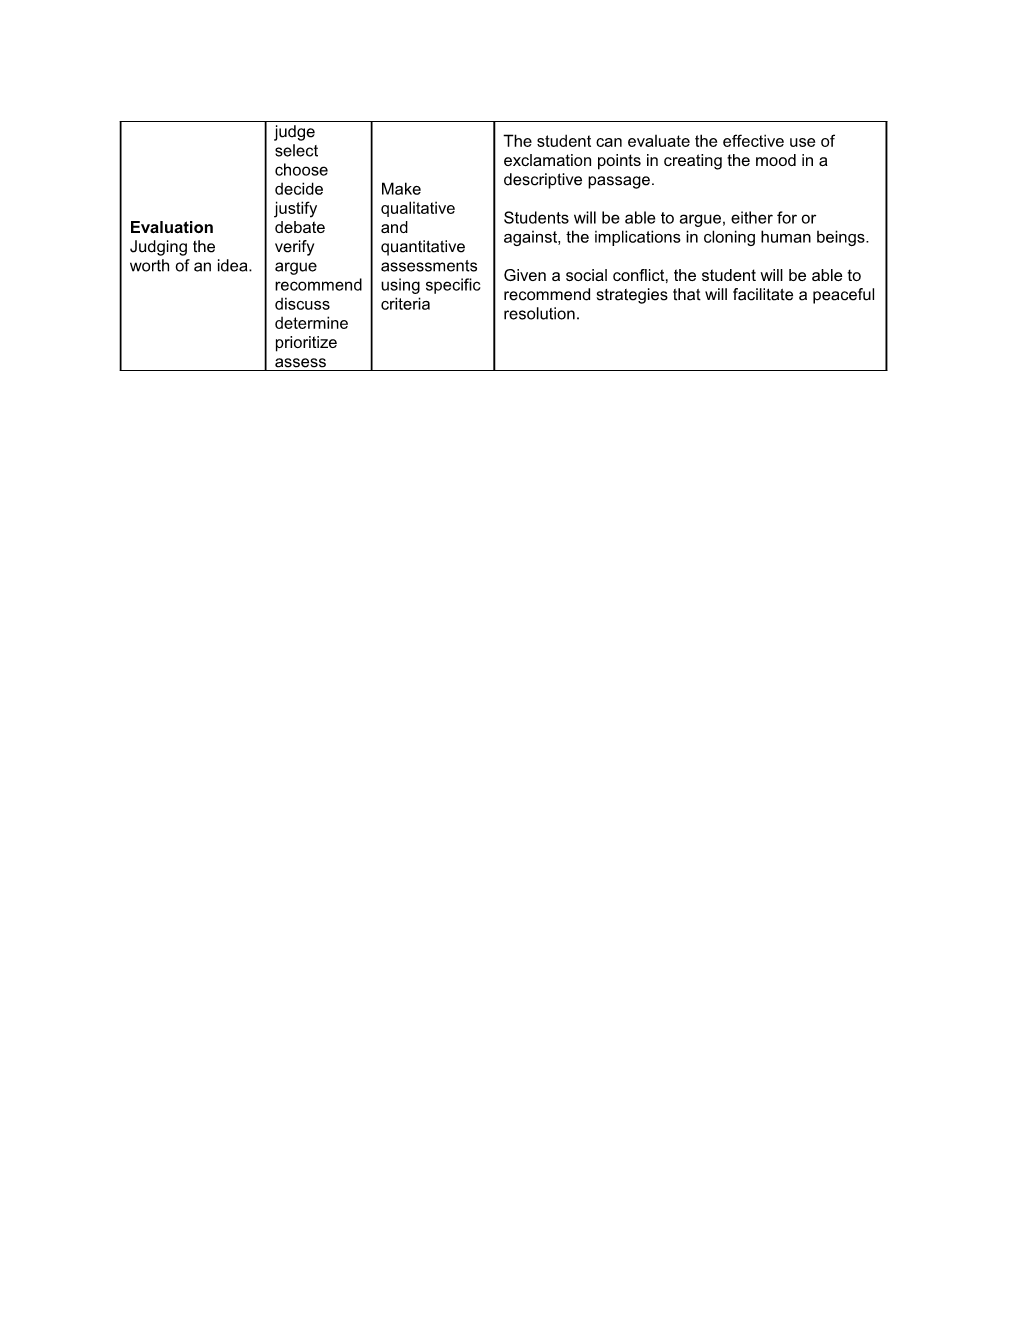 Examples of Translating Standards Into Learning Goals Into Objectives